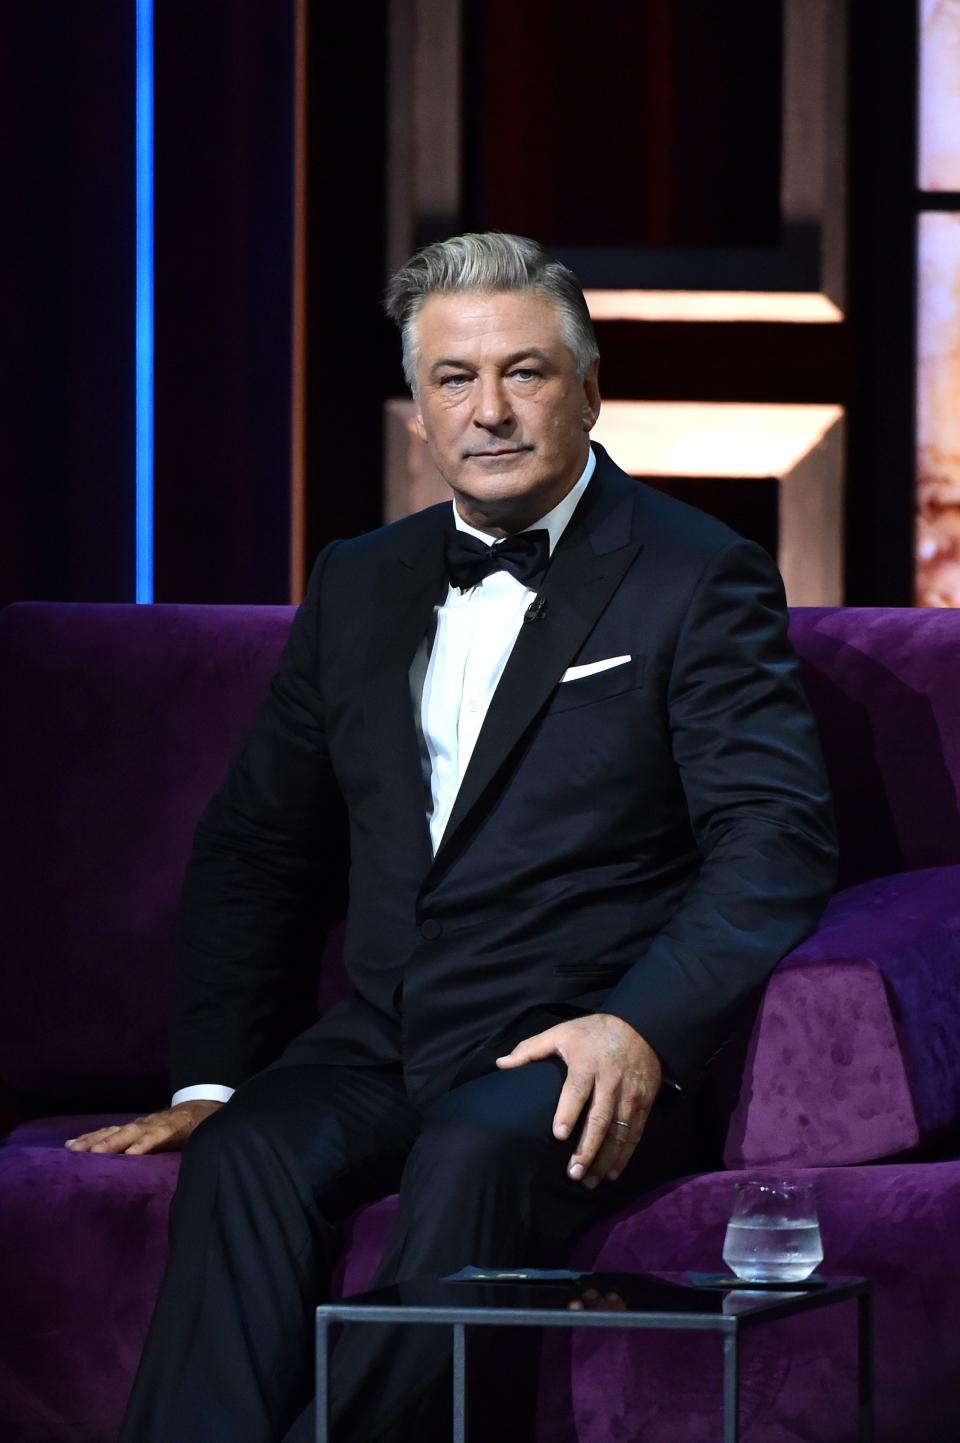 Alec Baldwin is mourning the death of his mom, Carol Baldwin, who died at 92. Hailey Bieber also gave a touching tribute to her grandmother on Instagram.